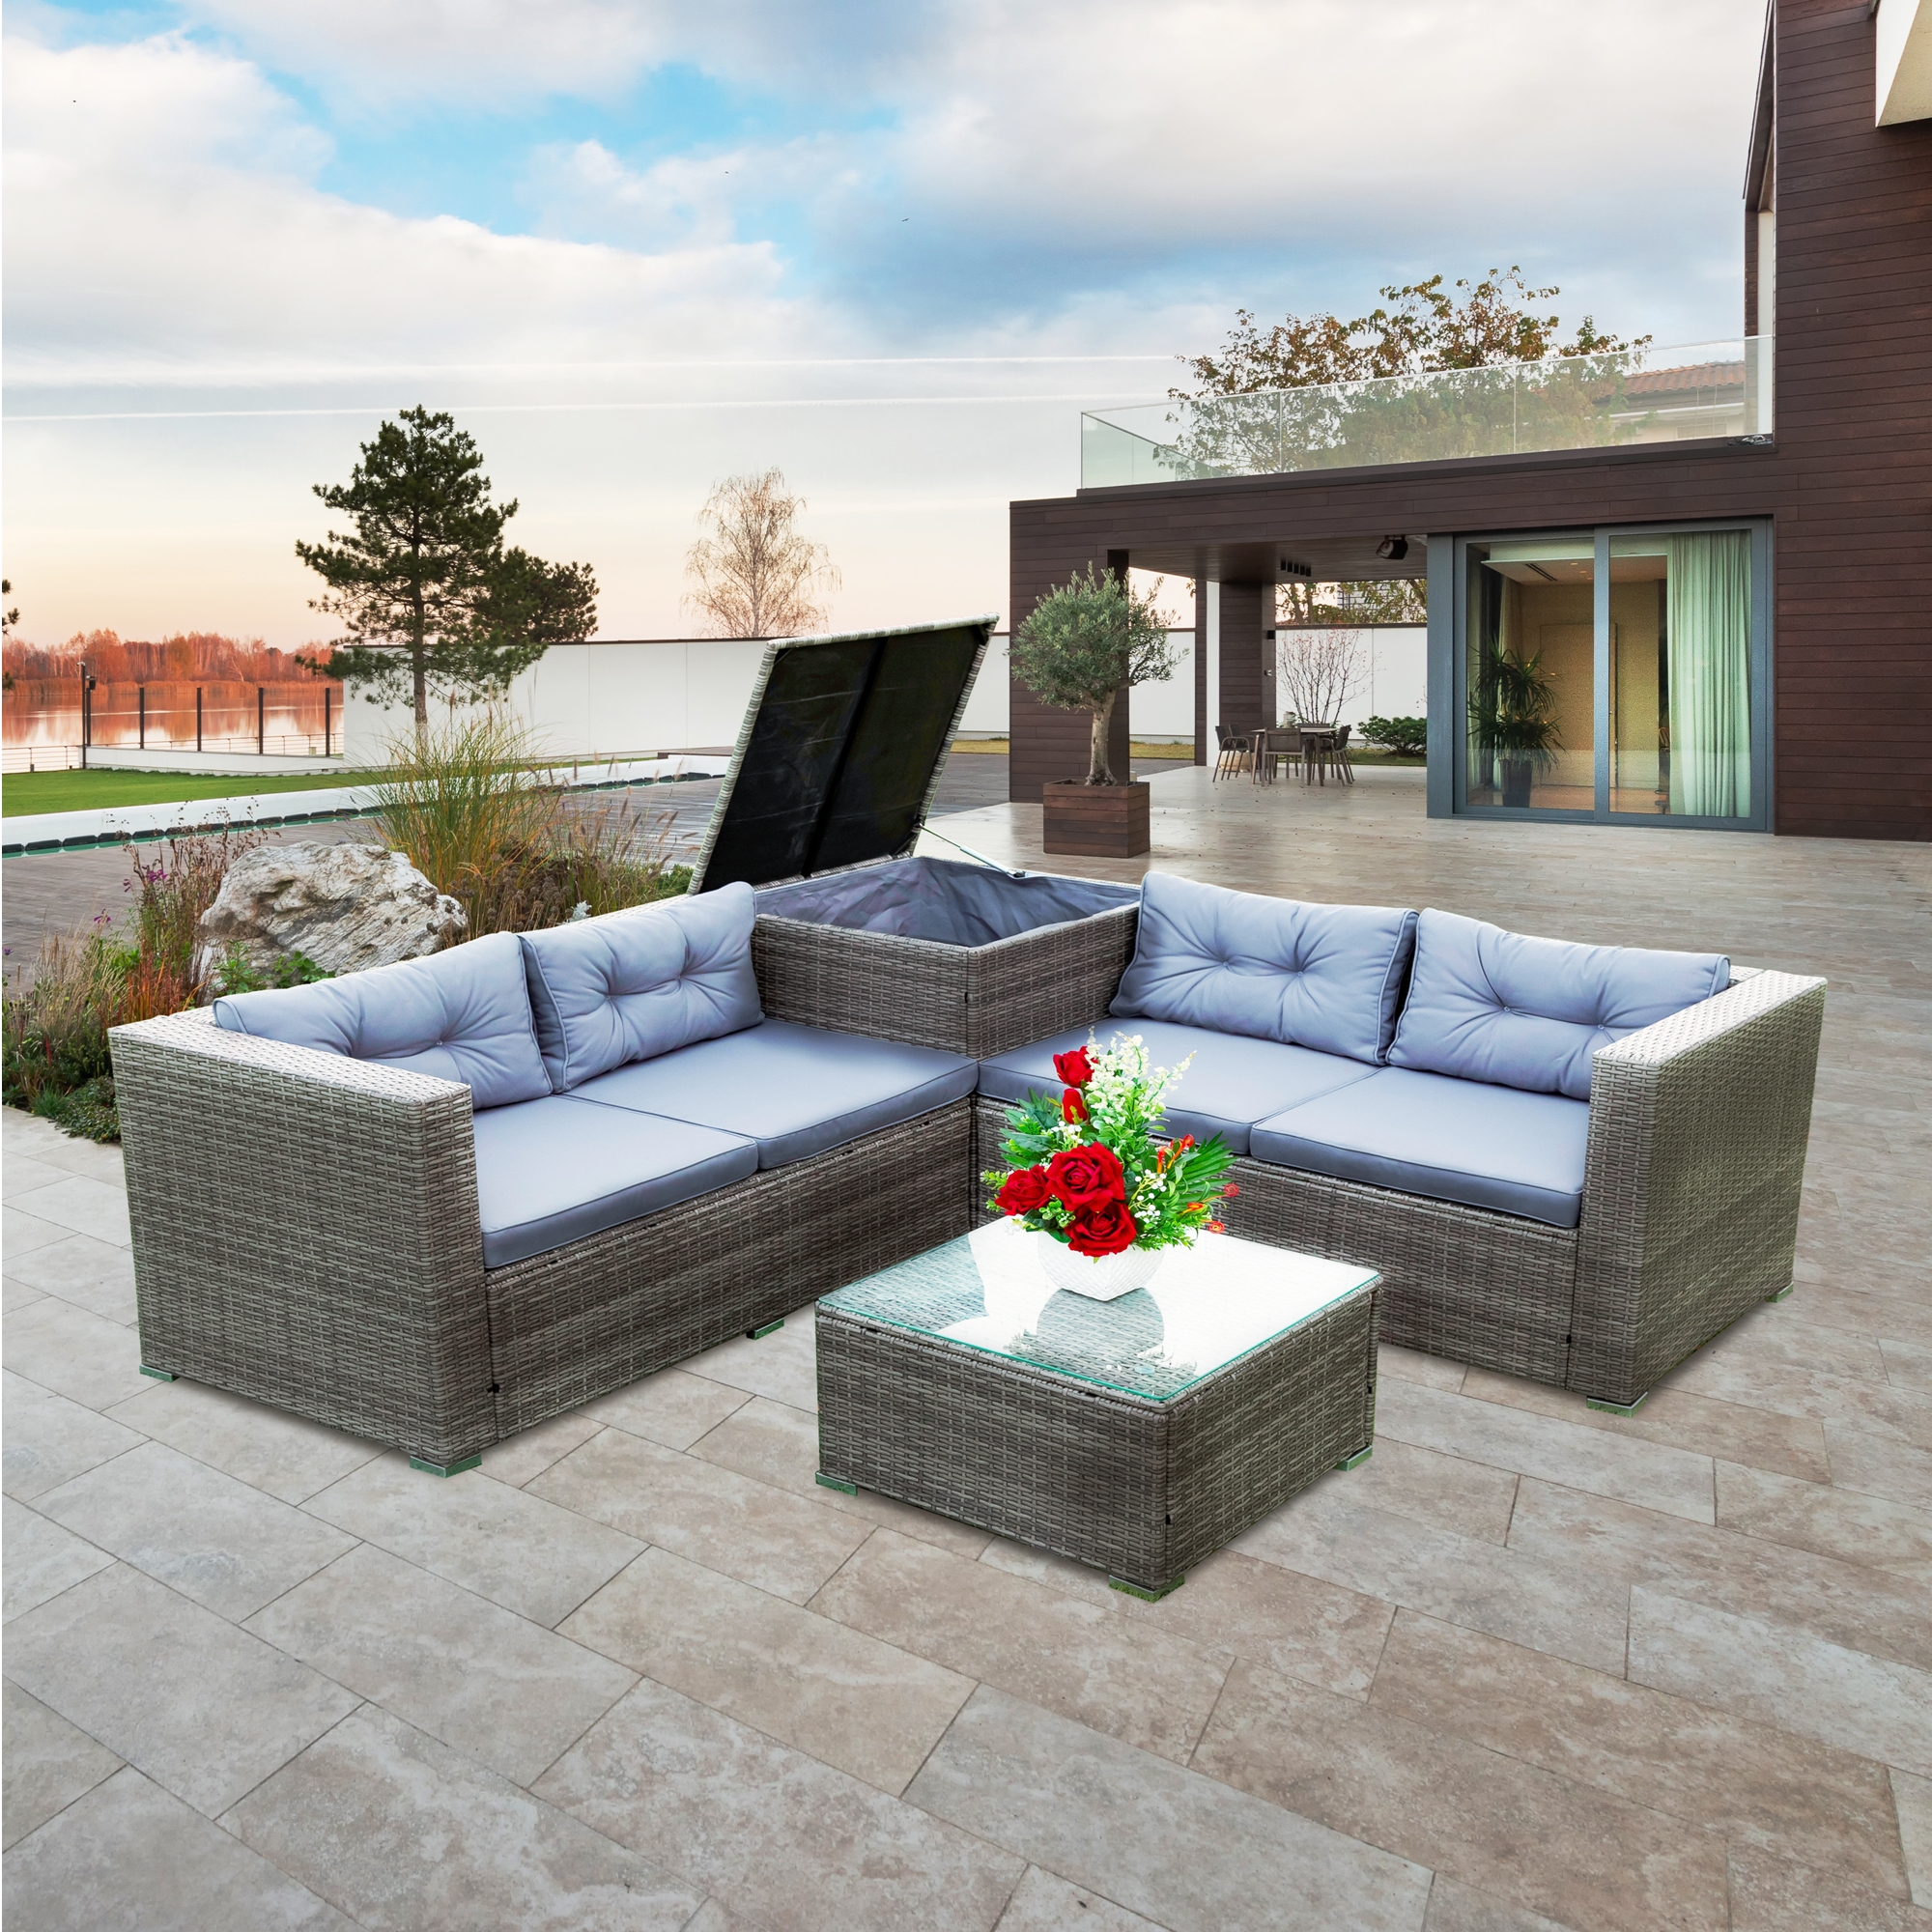 Patio Bistro Dining Chair Furniture Sets, 4 Pieces Patio Furniture Sets with Glass Coffee Table & Storage Box, Leisure Chair Conversation Set with Soft Cushion for Garden Poolside, Grey, SS2174 - image 1 of 9